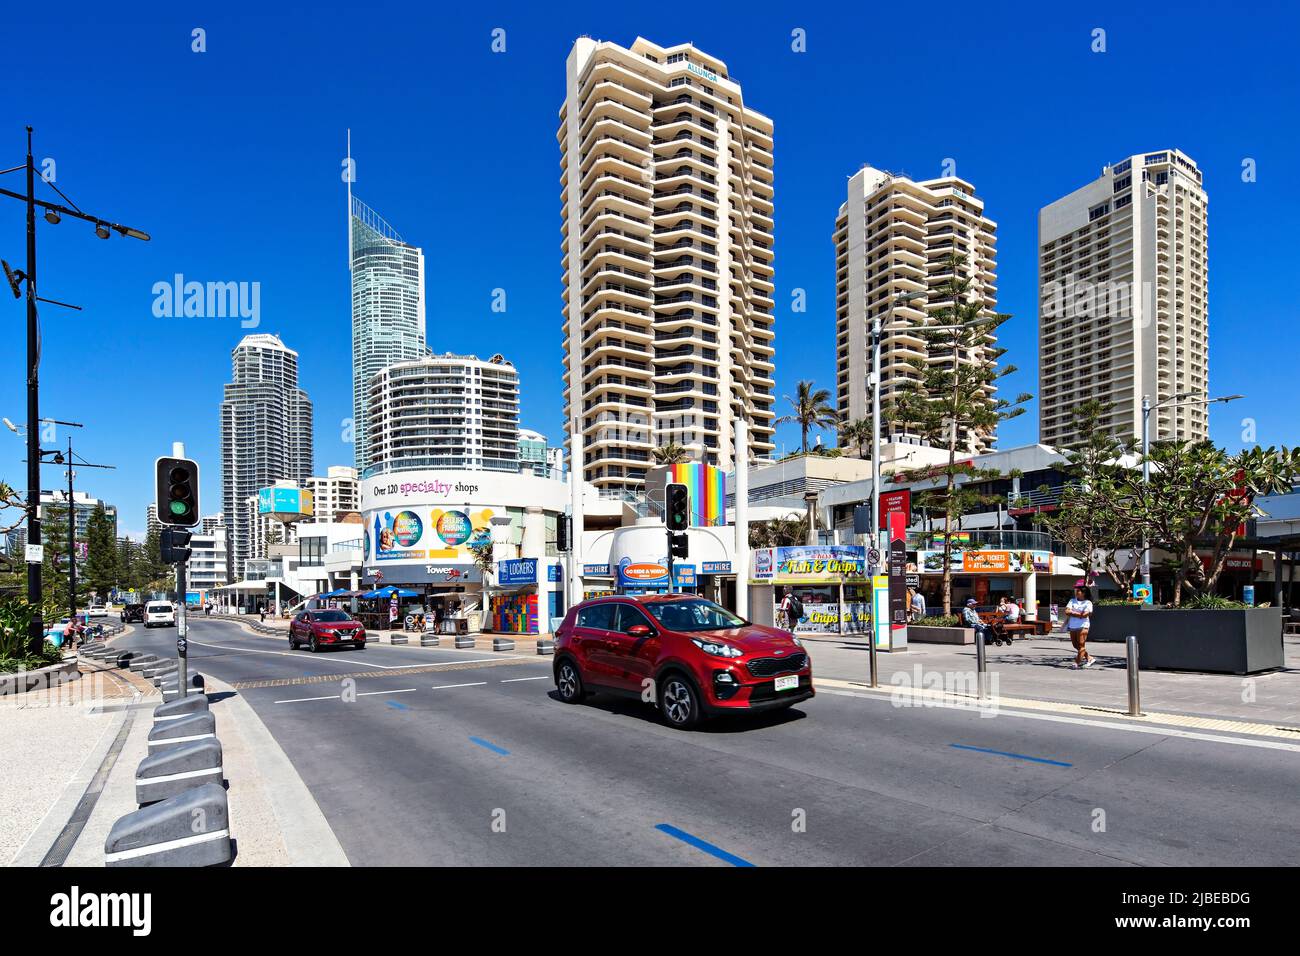 Queensland Australia /   High Rise Apartments dominate the skyline in Surfers Paradise. Stock Photo